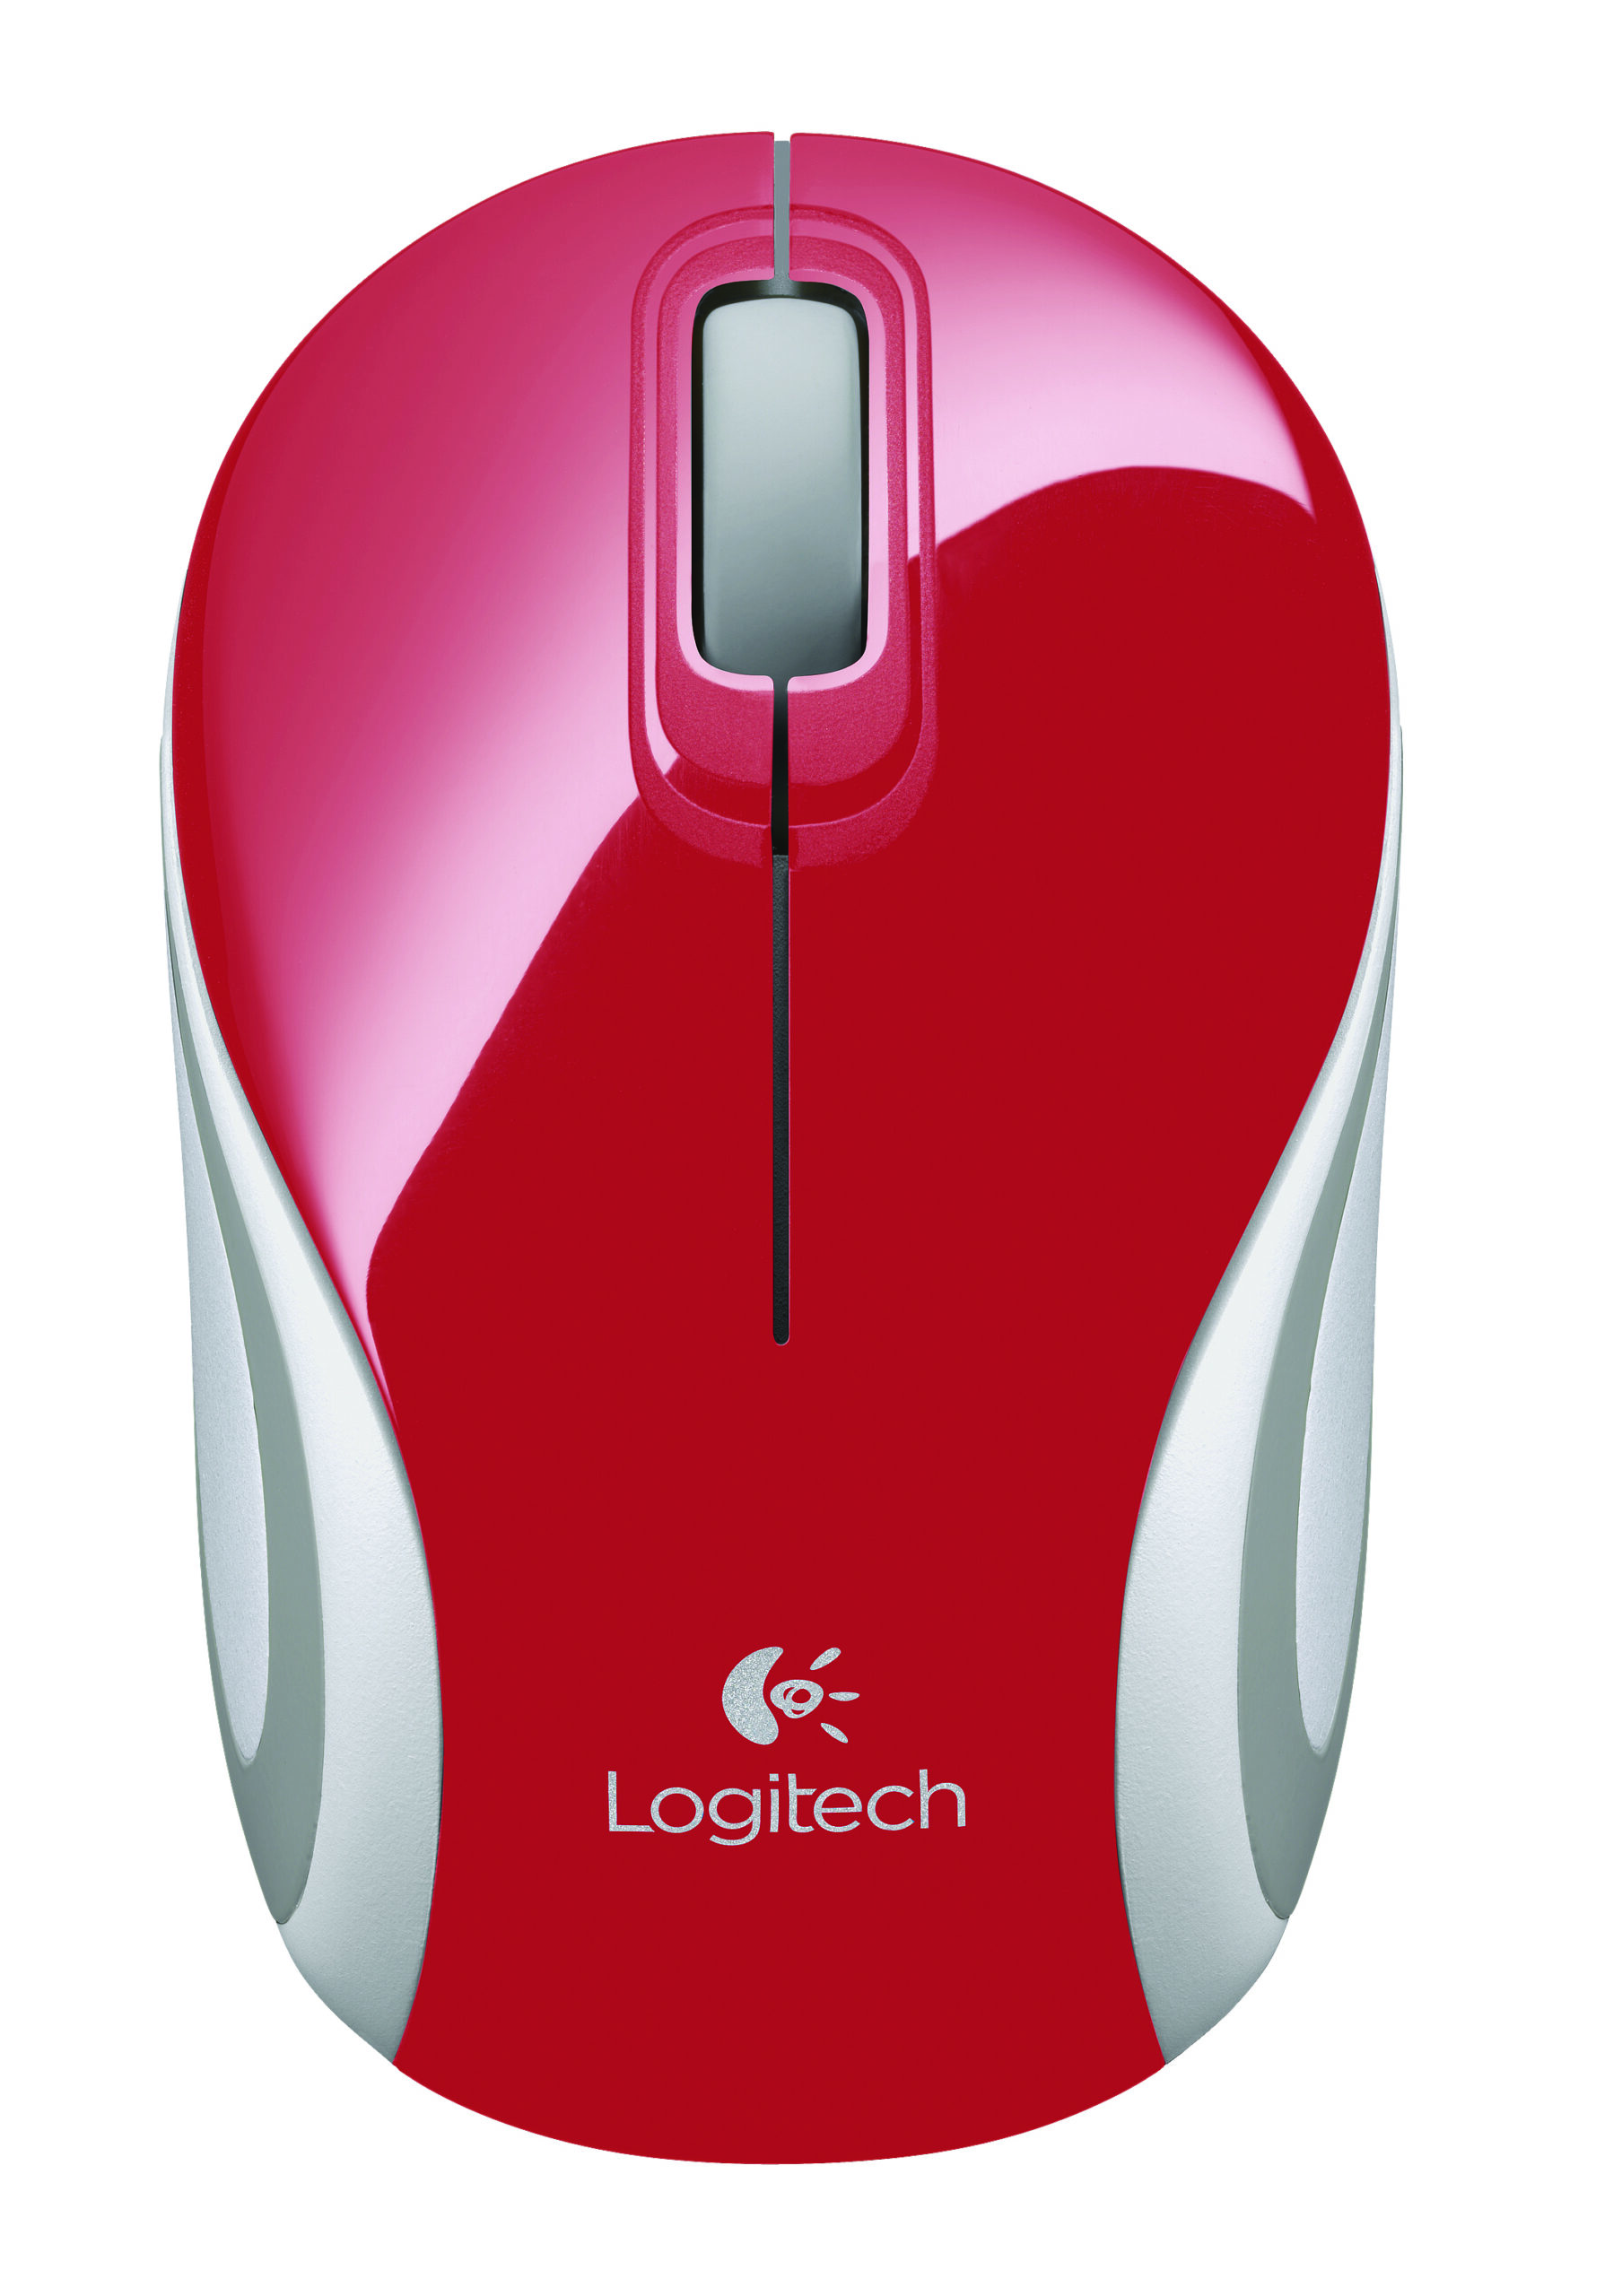 Wireless Mini Mouse M187 Red Logitech Input Devices 910 002732 5099206032194